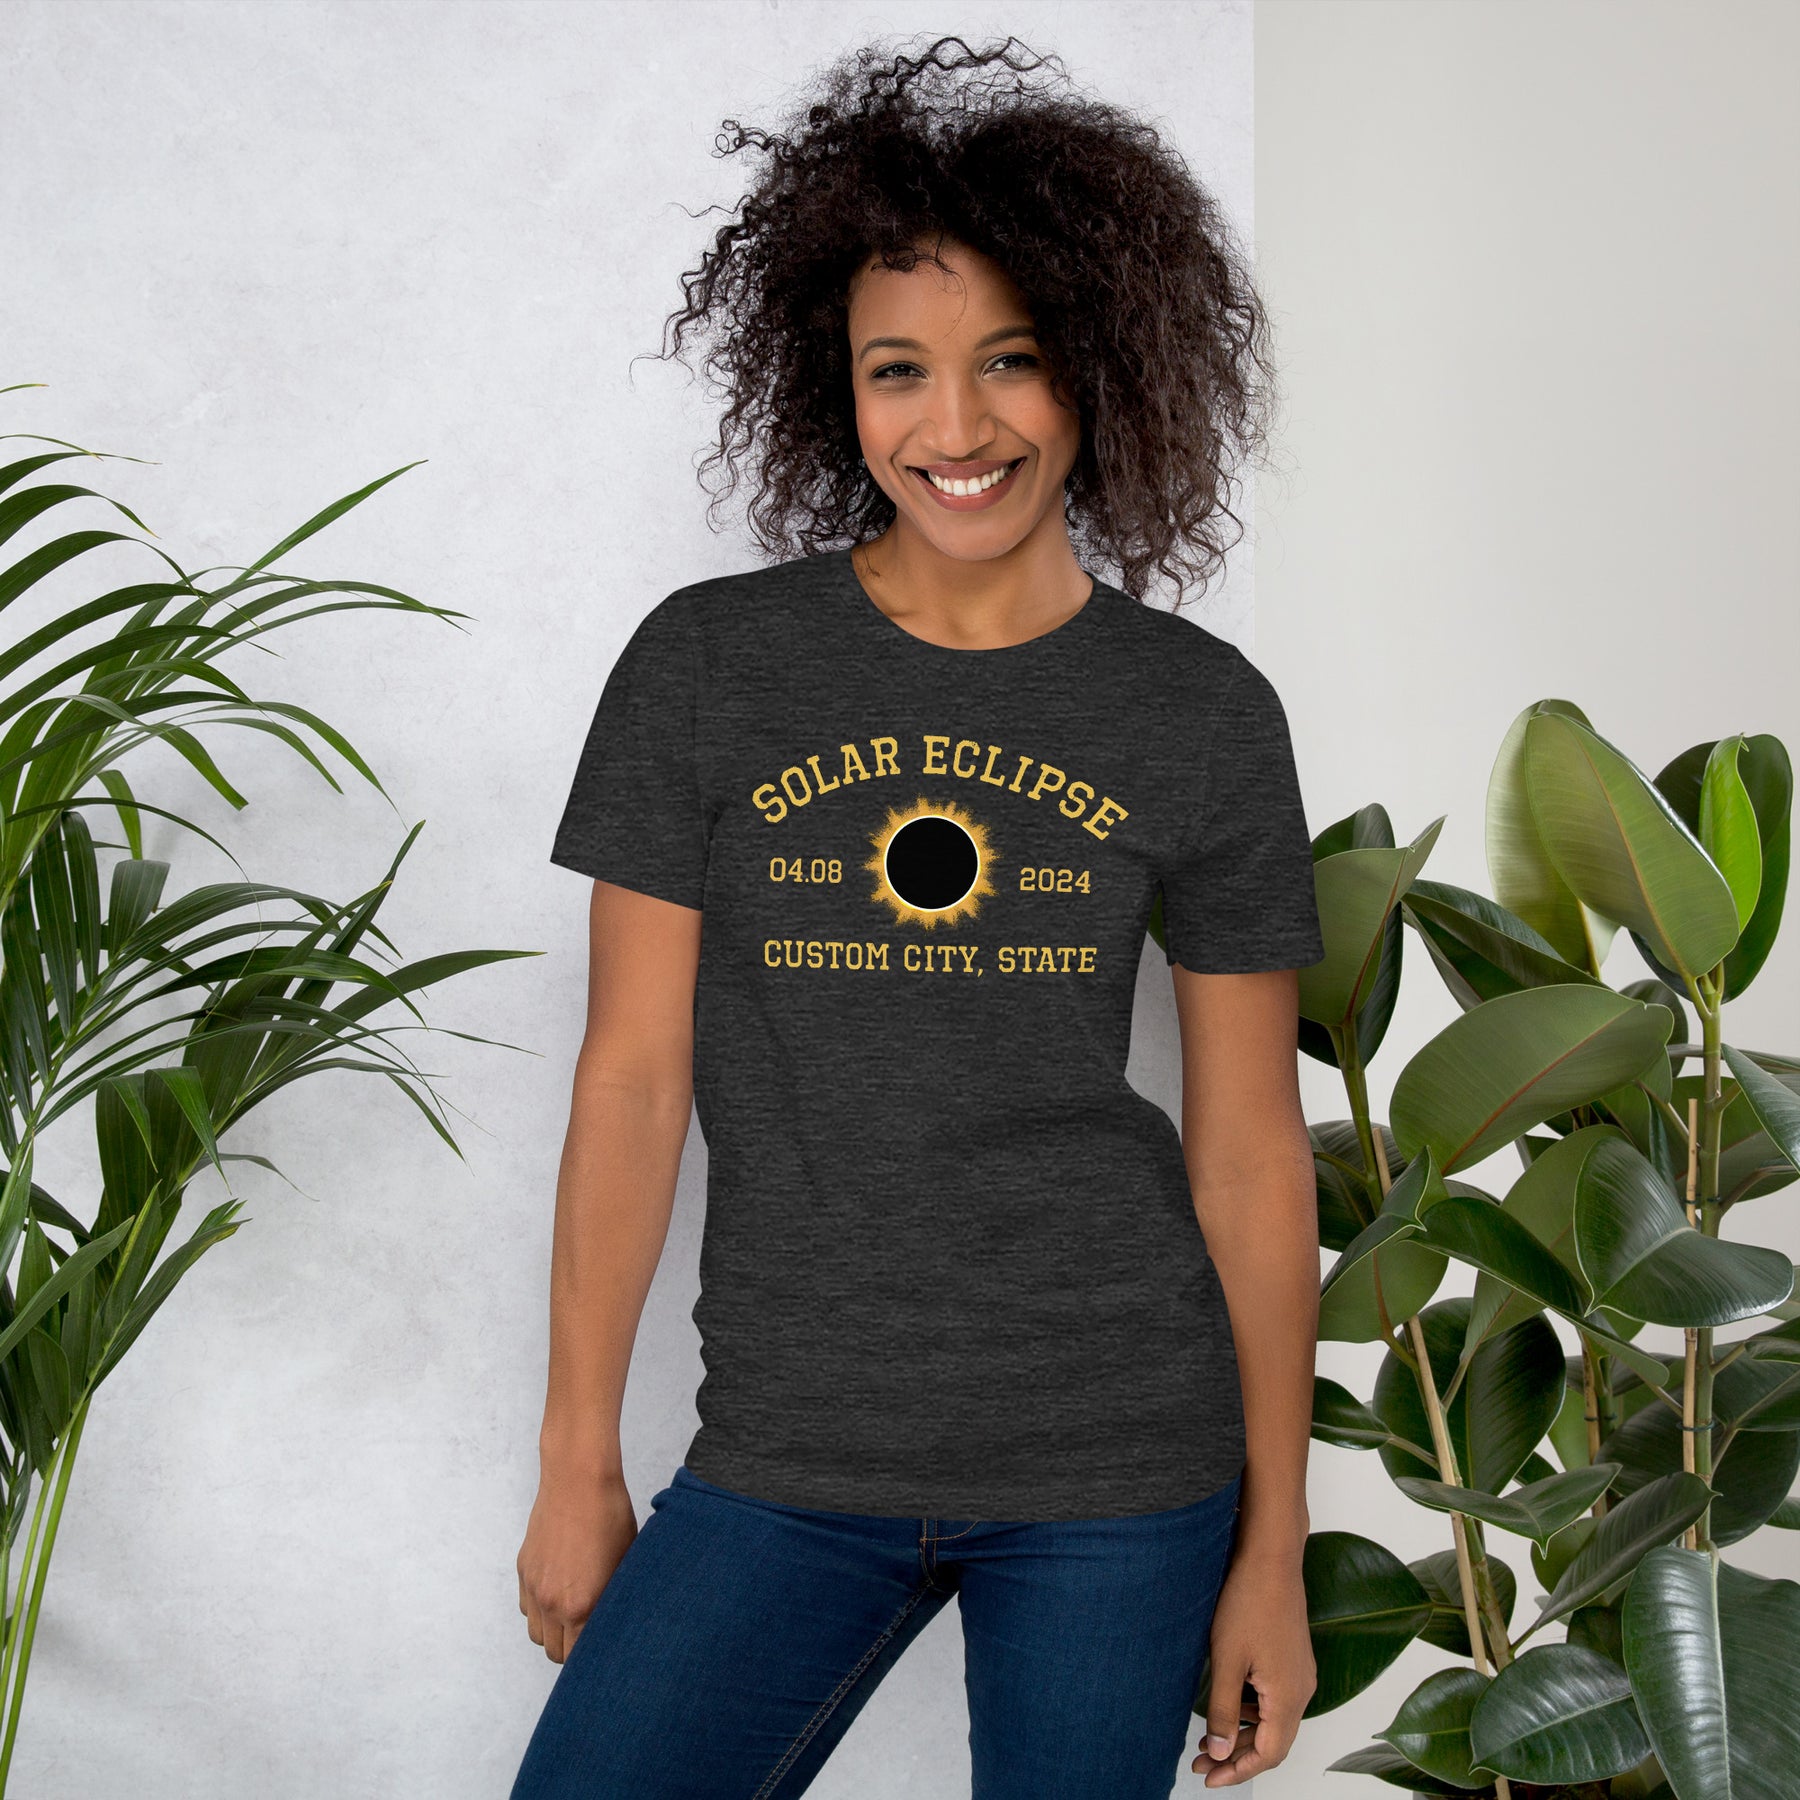 2024 Total Solar Eclipse Shirt, Customized State & City, Sun Moon Totality Event Tee, 4/8/2024 Eclipse Across USA, Canada, Mexico